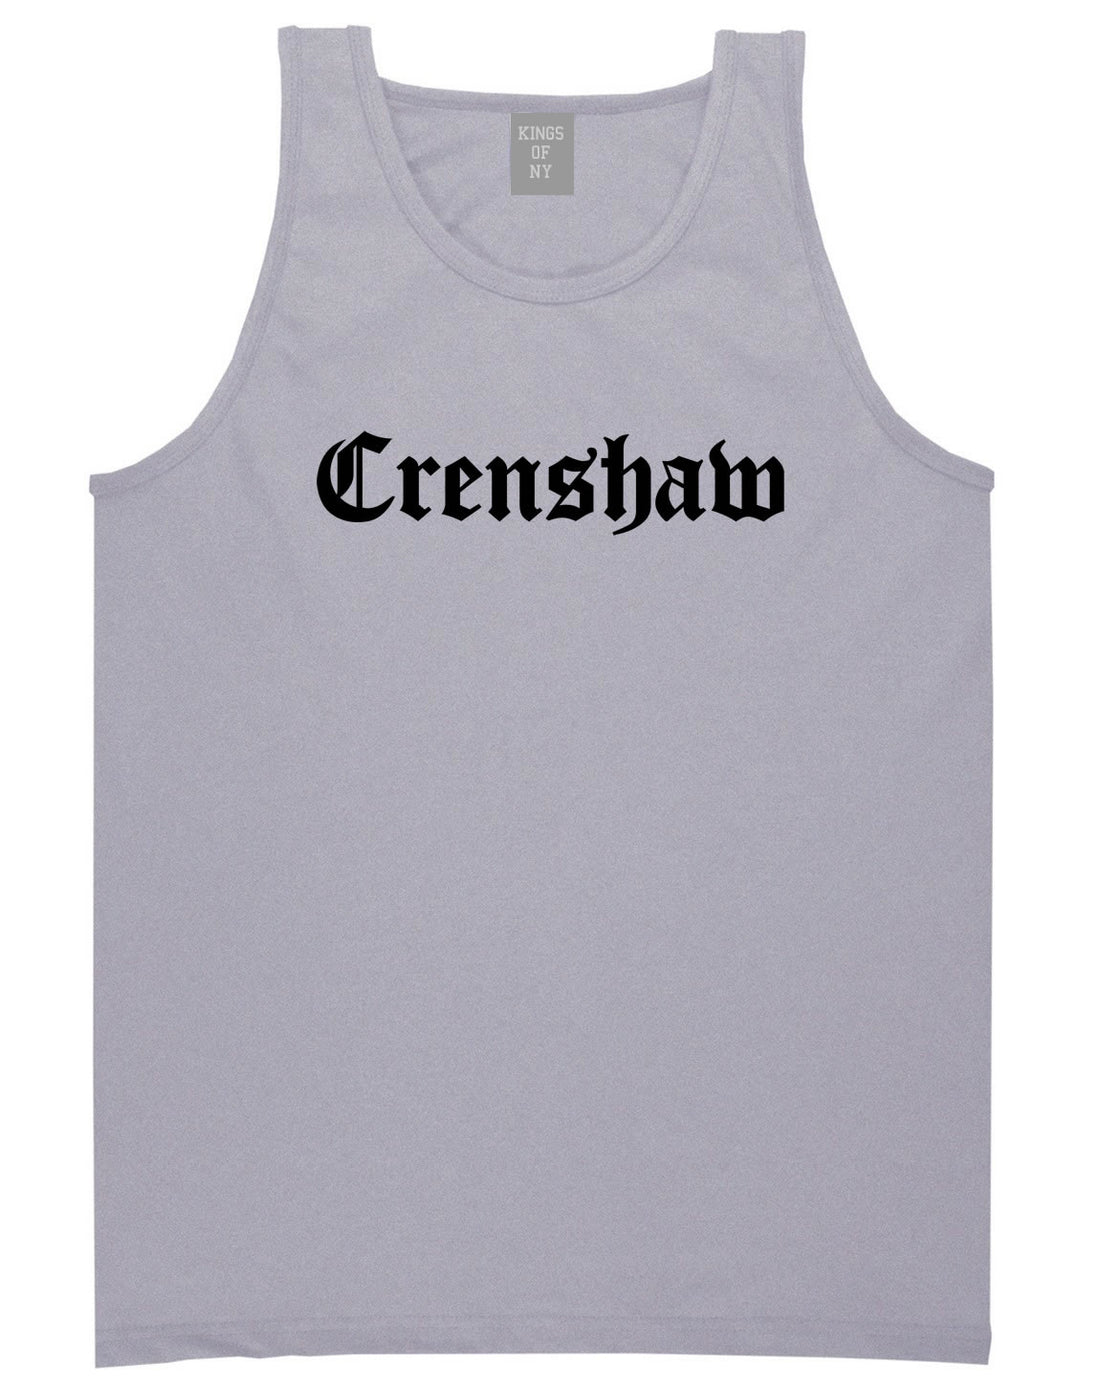 Crenshaw Old English California Tank Top in Grey By Kings Of NY